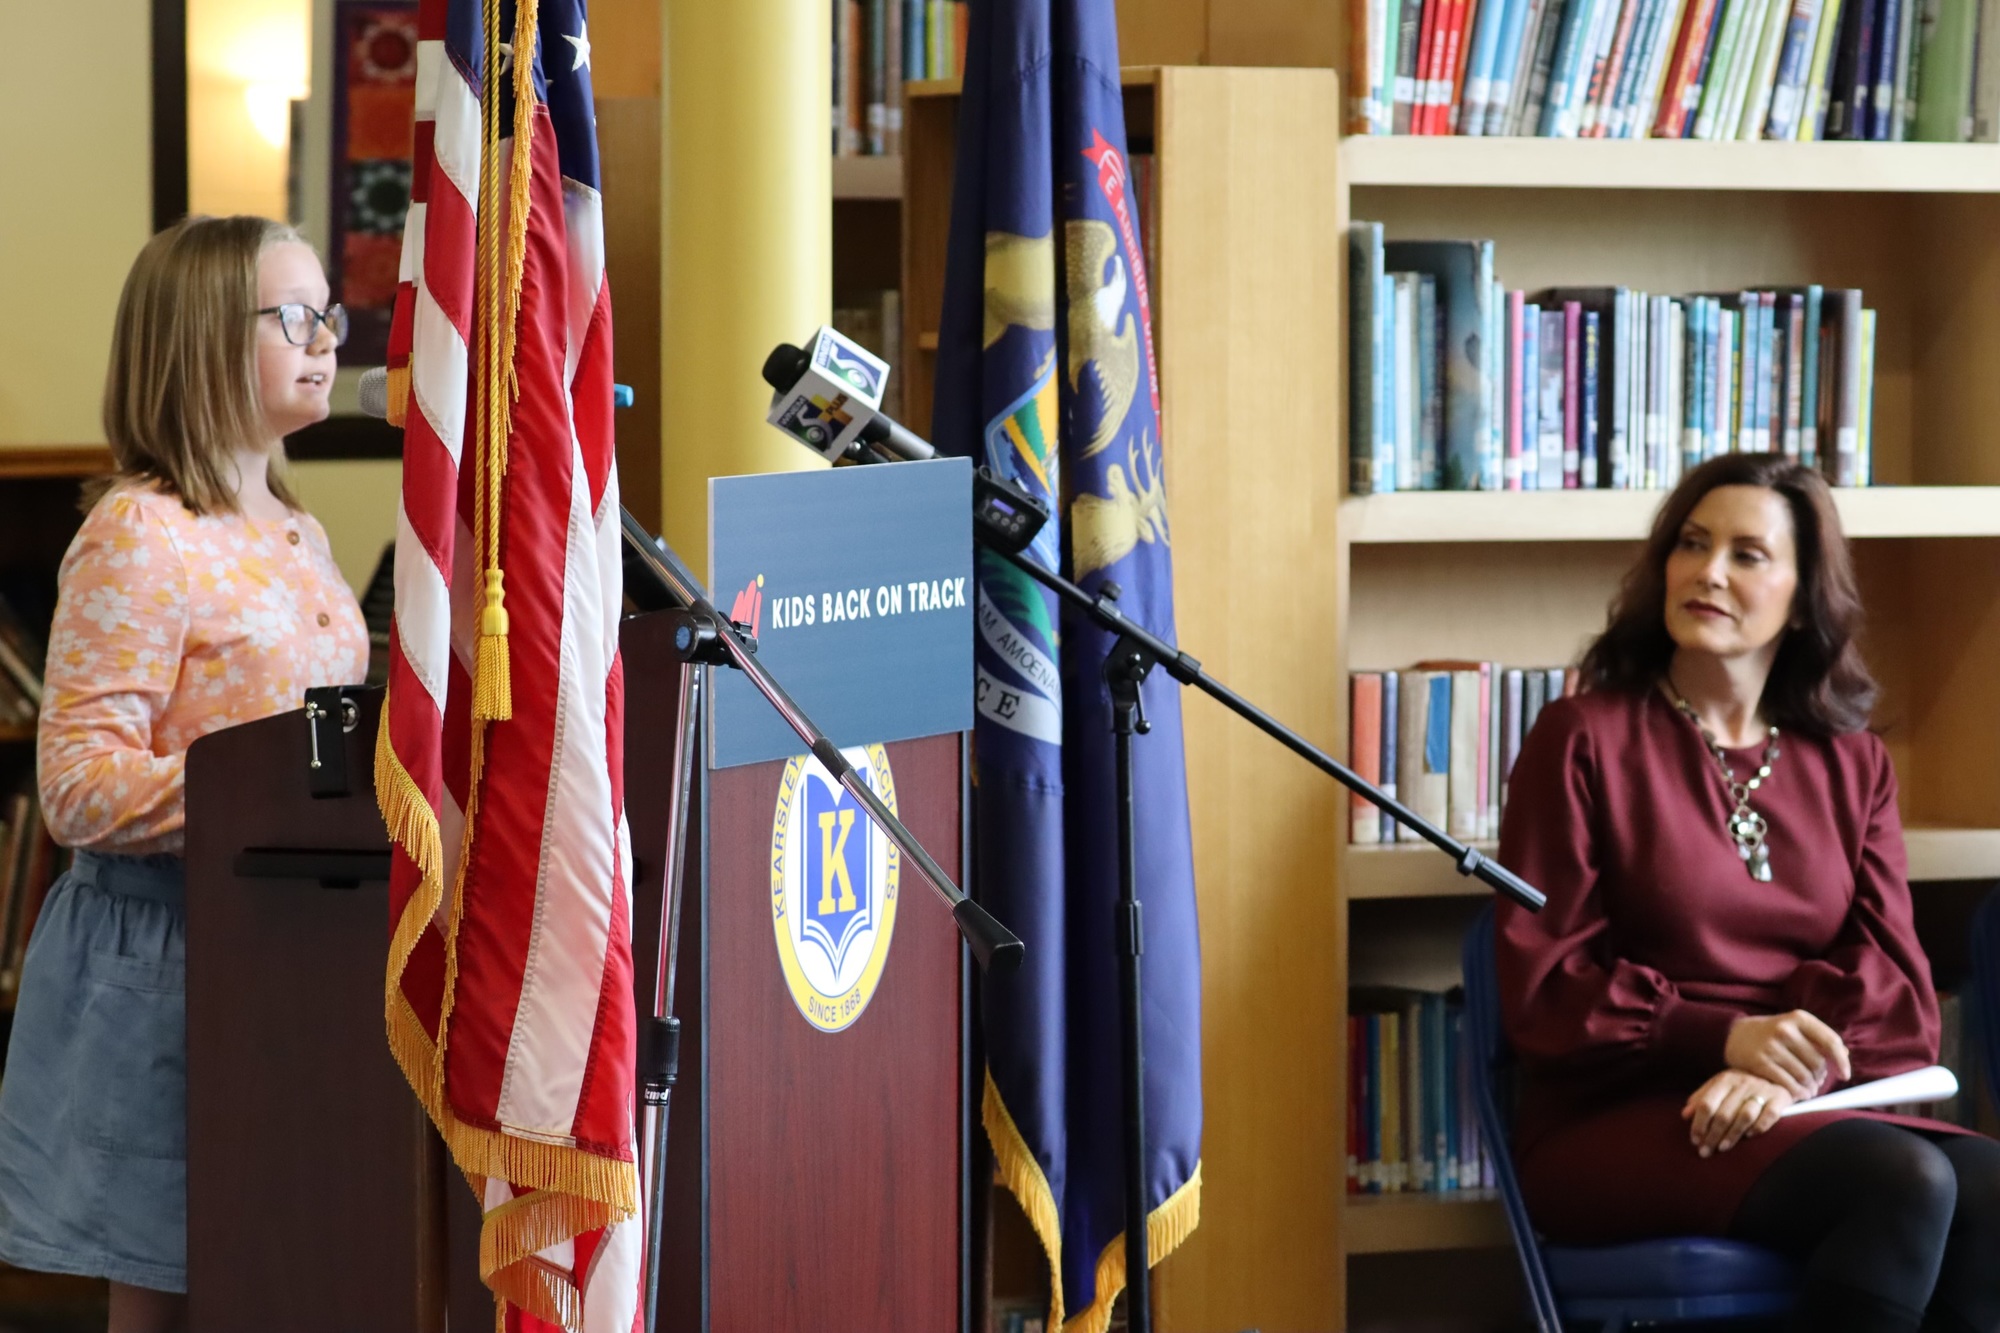 Governor Whitmer listens as a student named Caroline speaks from a podium at an event announcing the MI Kids Back on Track plan.